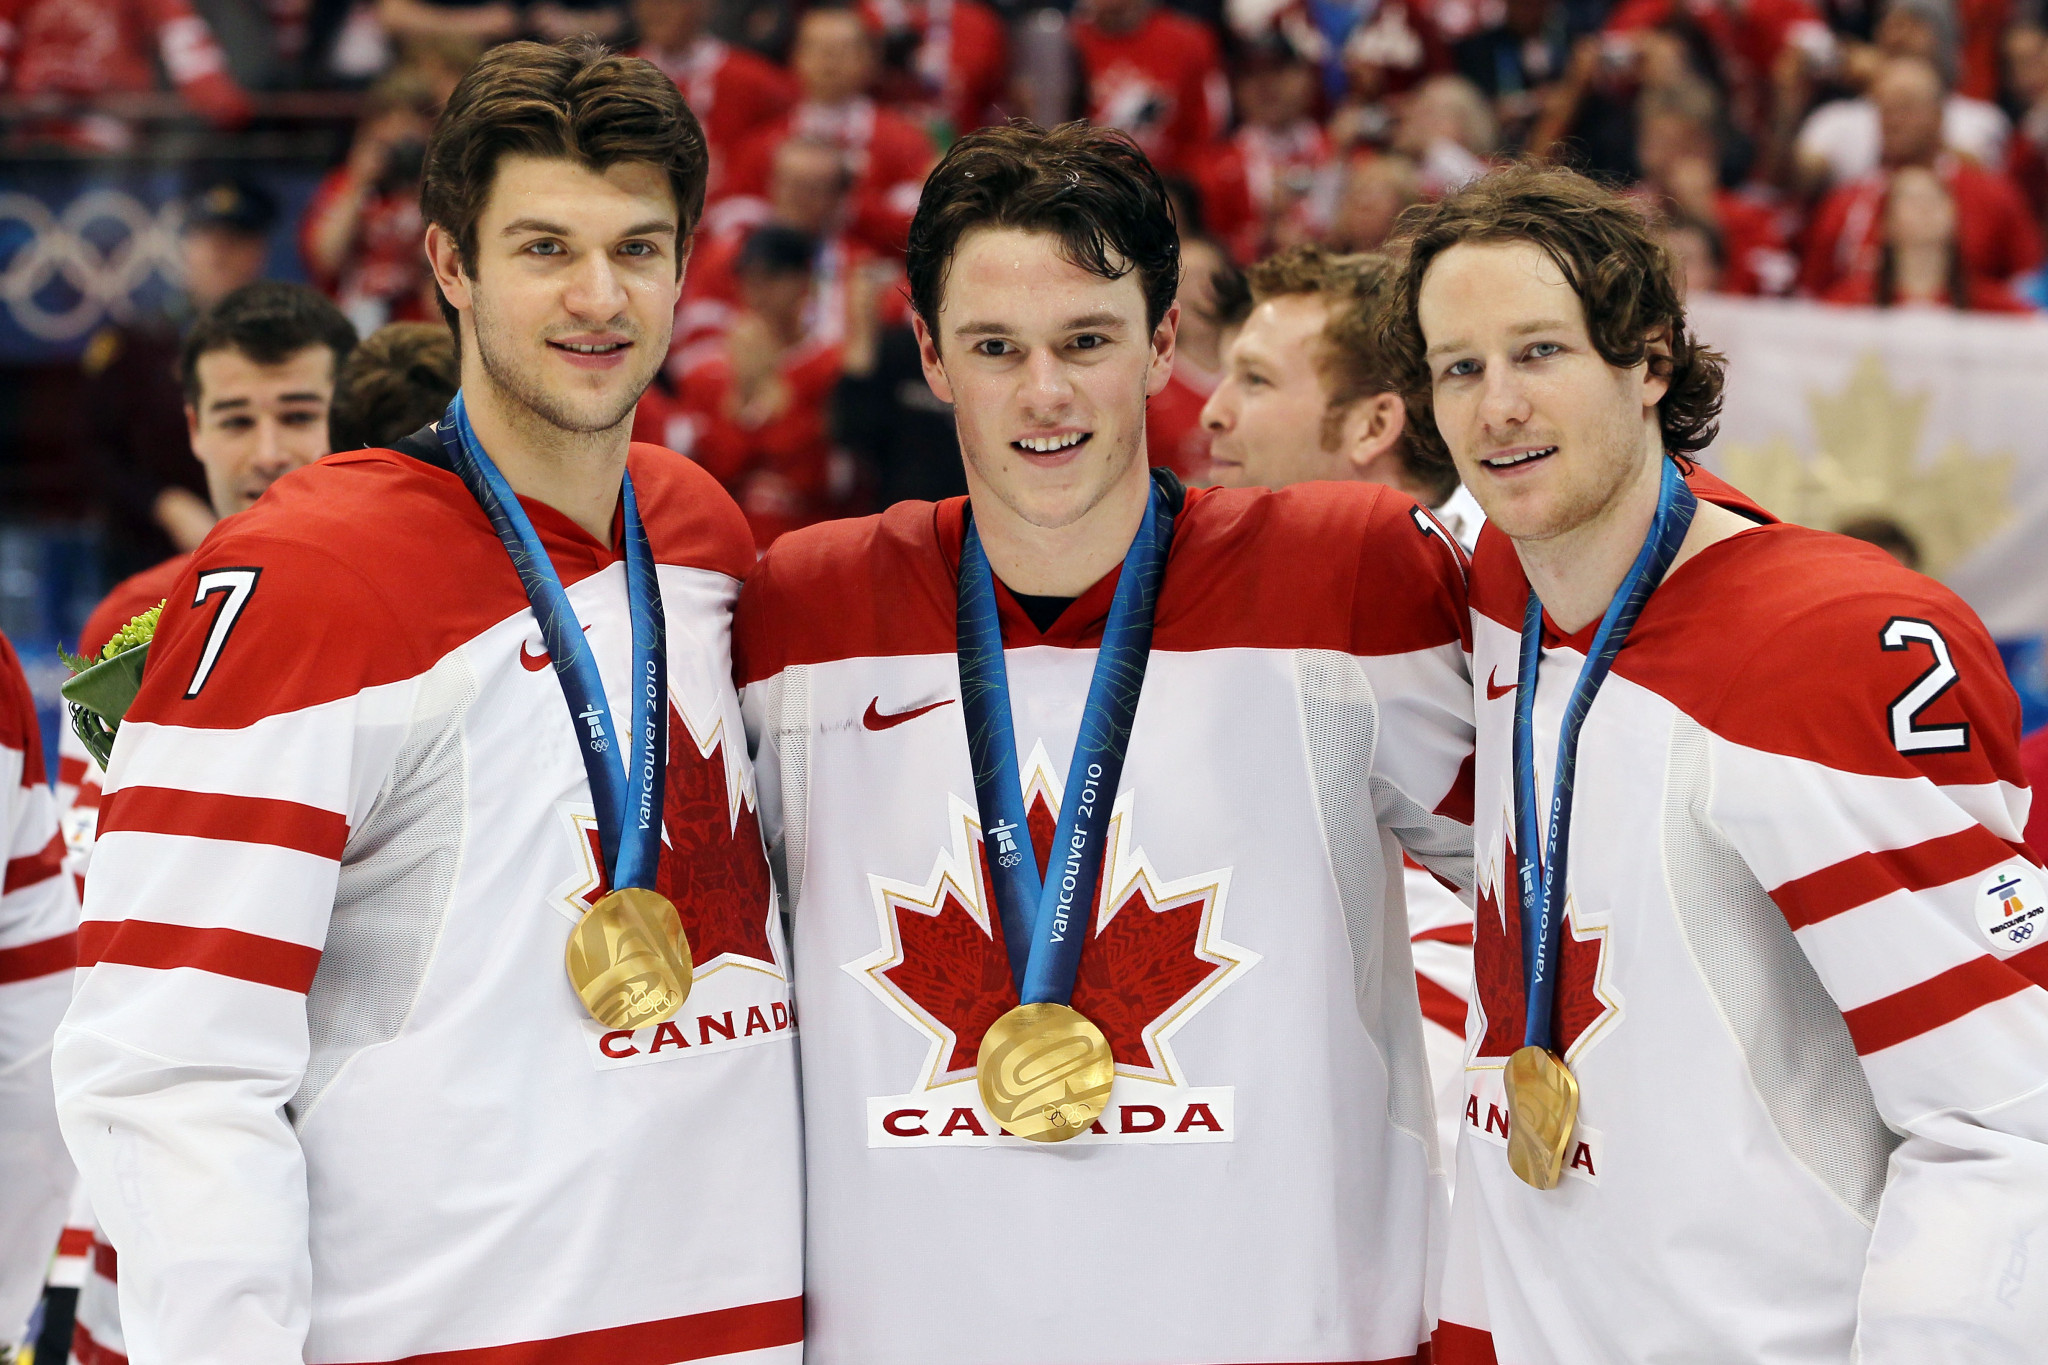 Duncan Keith, right, was a member of the Canadian team which won gold at Vancouver 2010 ©Getty Images